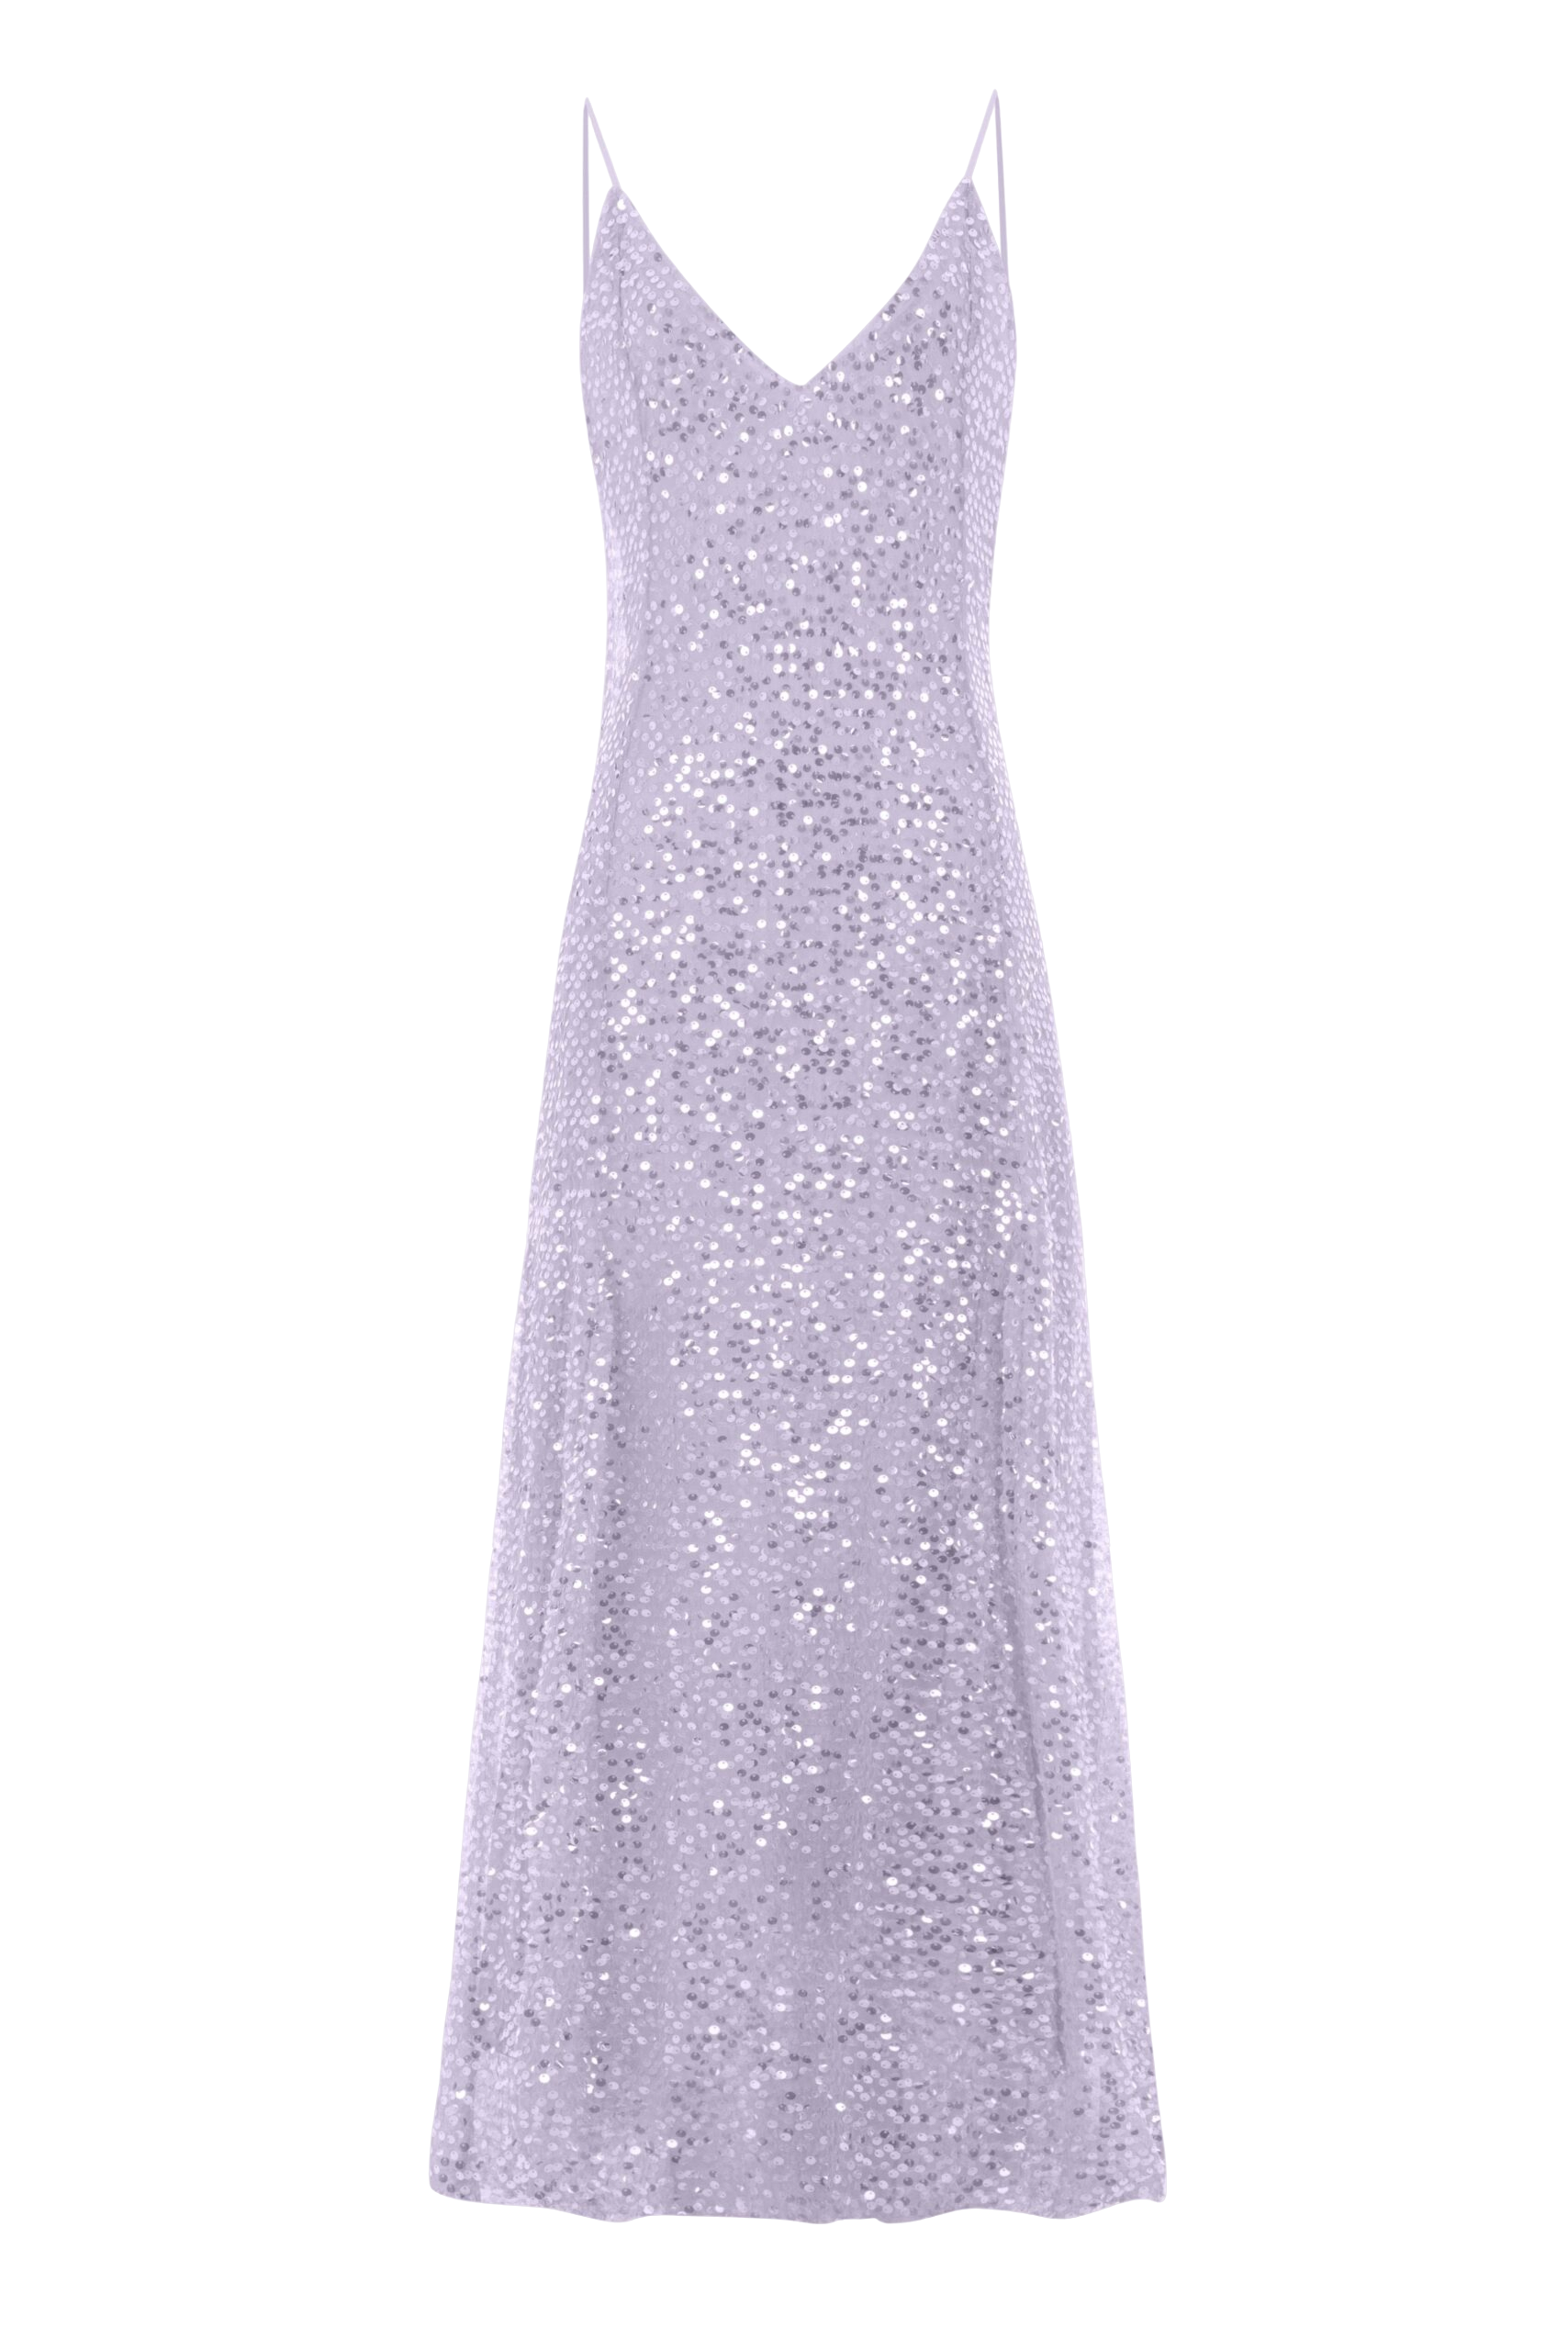 F.ilkk Lilac Sequined Dress In Blue